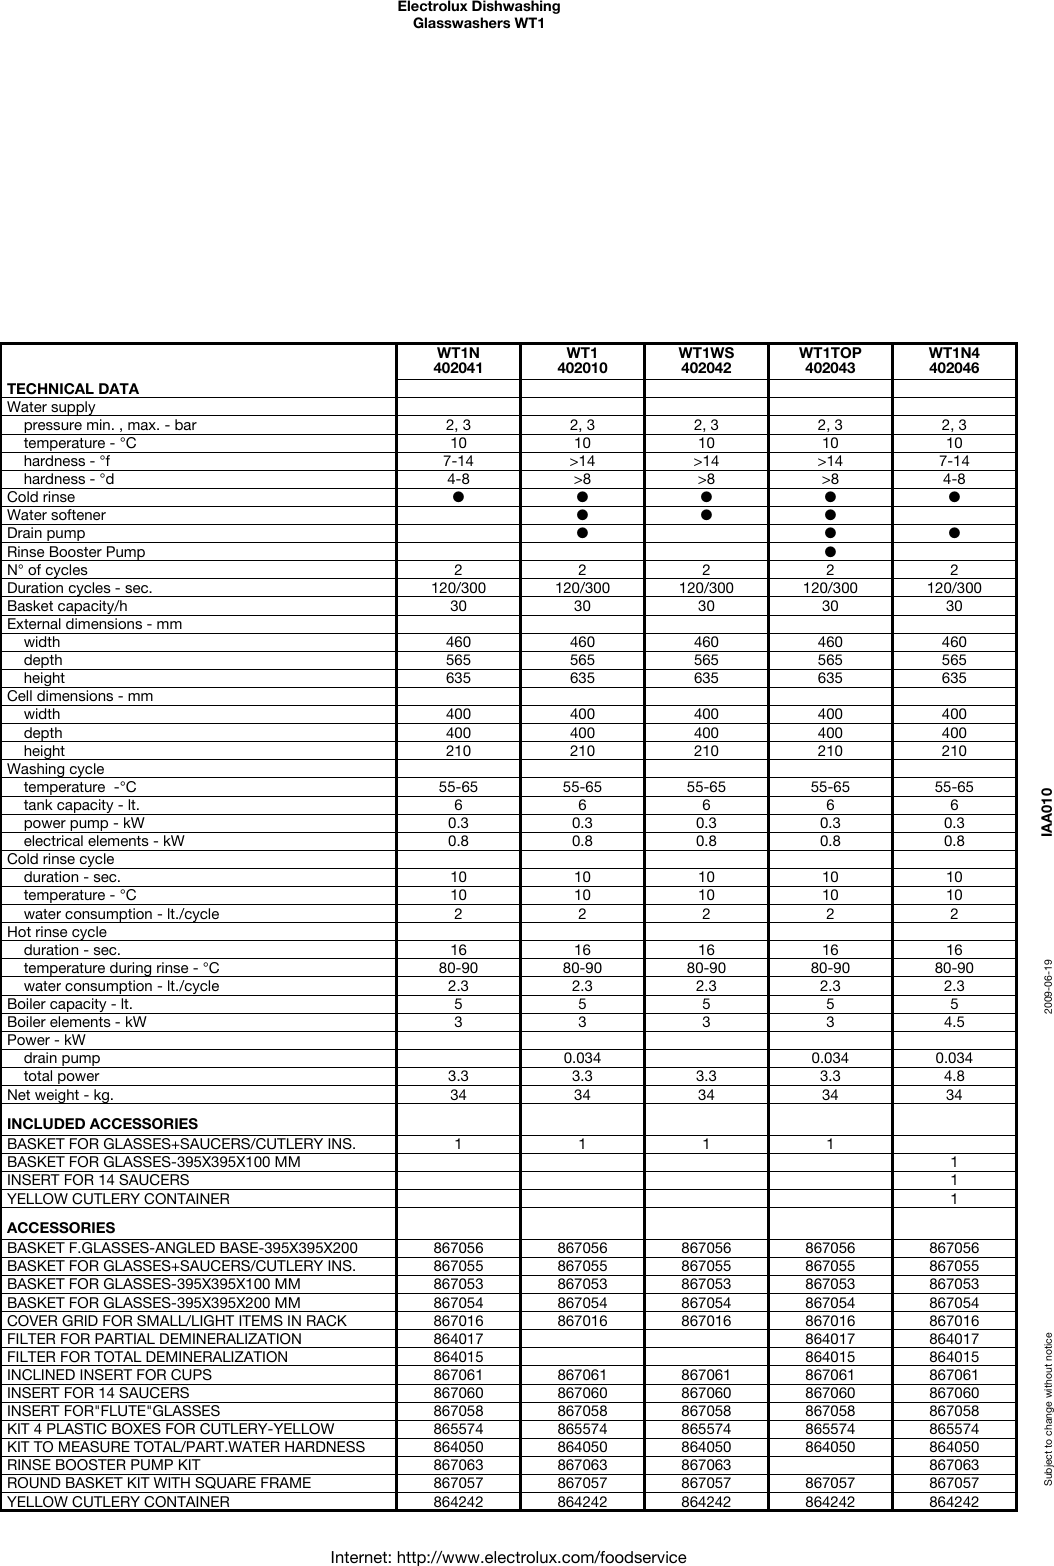 Page 2 of 4 - Electrolux Electrolux-402010-Users-Manual- Dishwashing  Electrolux-402010-users-manual